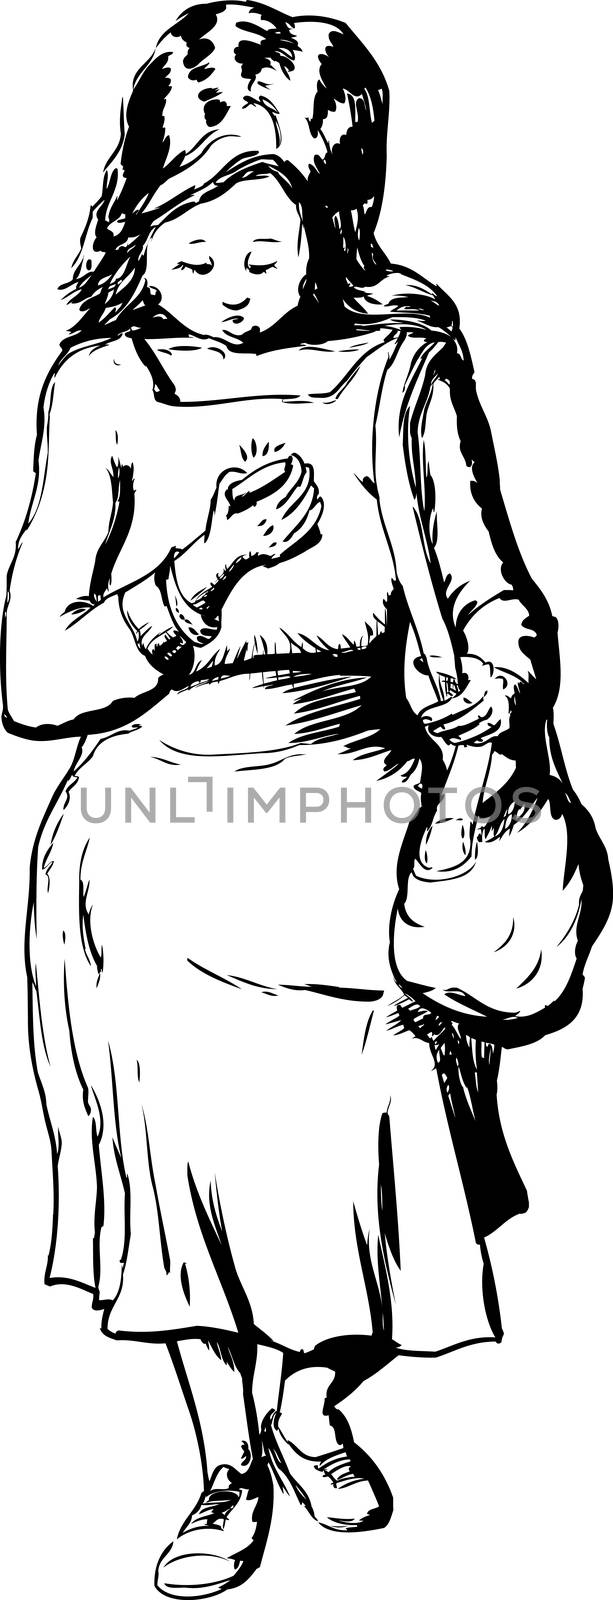 Outlined Caucasian woman carrying purse looking down while walking and using phone